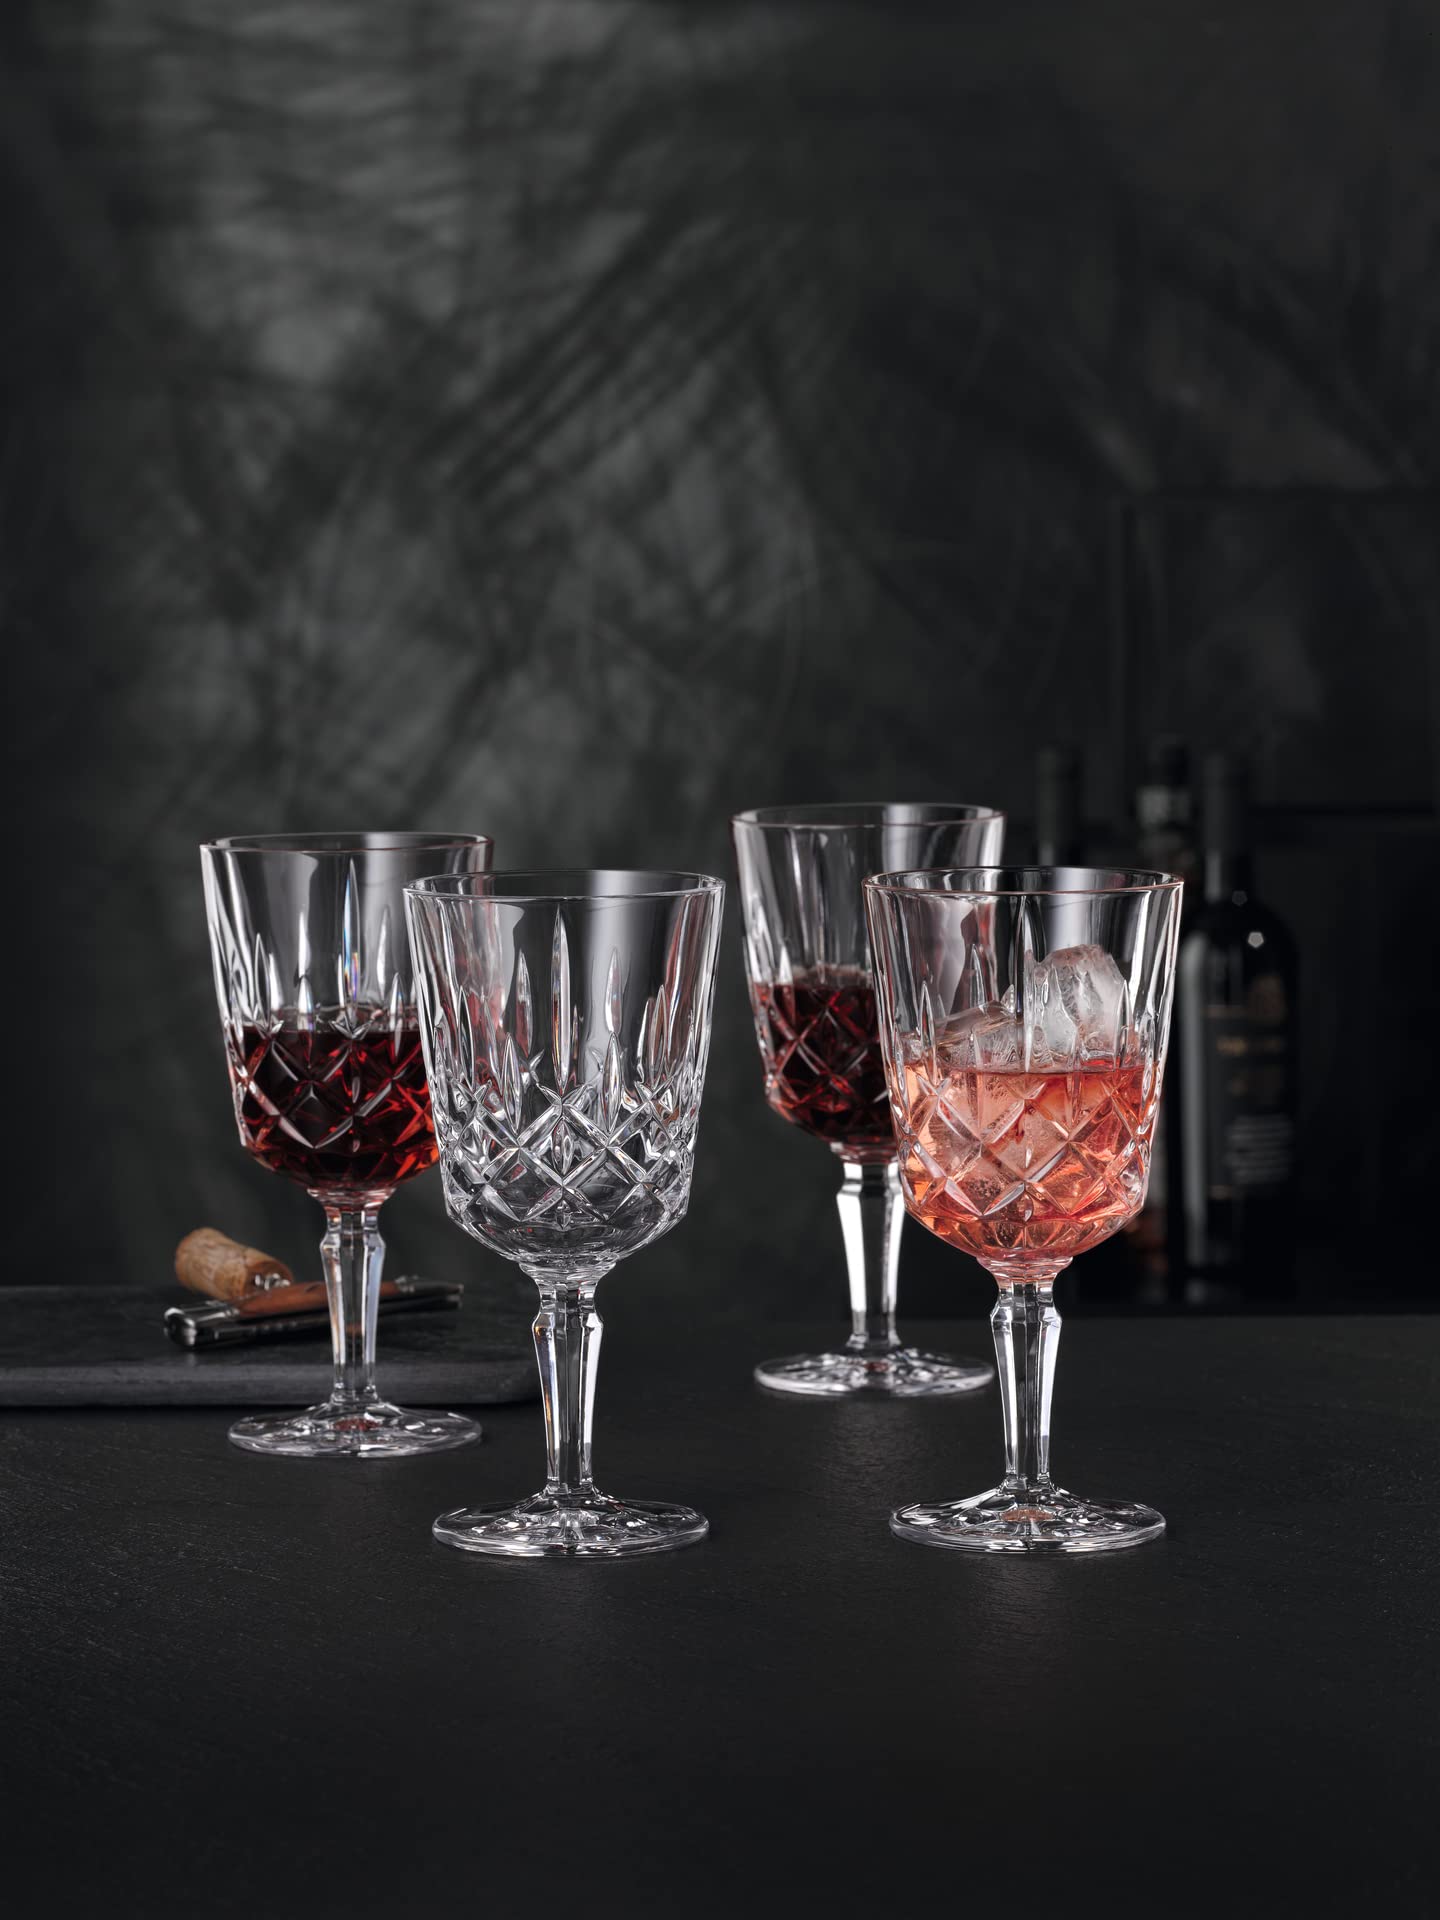 Nachtmann Noblesse Collection 7.4” Cocktail and Wine Glasses, Made of Fine Crystal Glass, White or Red Wine Glasses, 12.5-Ounces, Dishwasher Safe, Set of 4